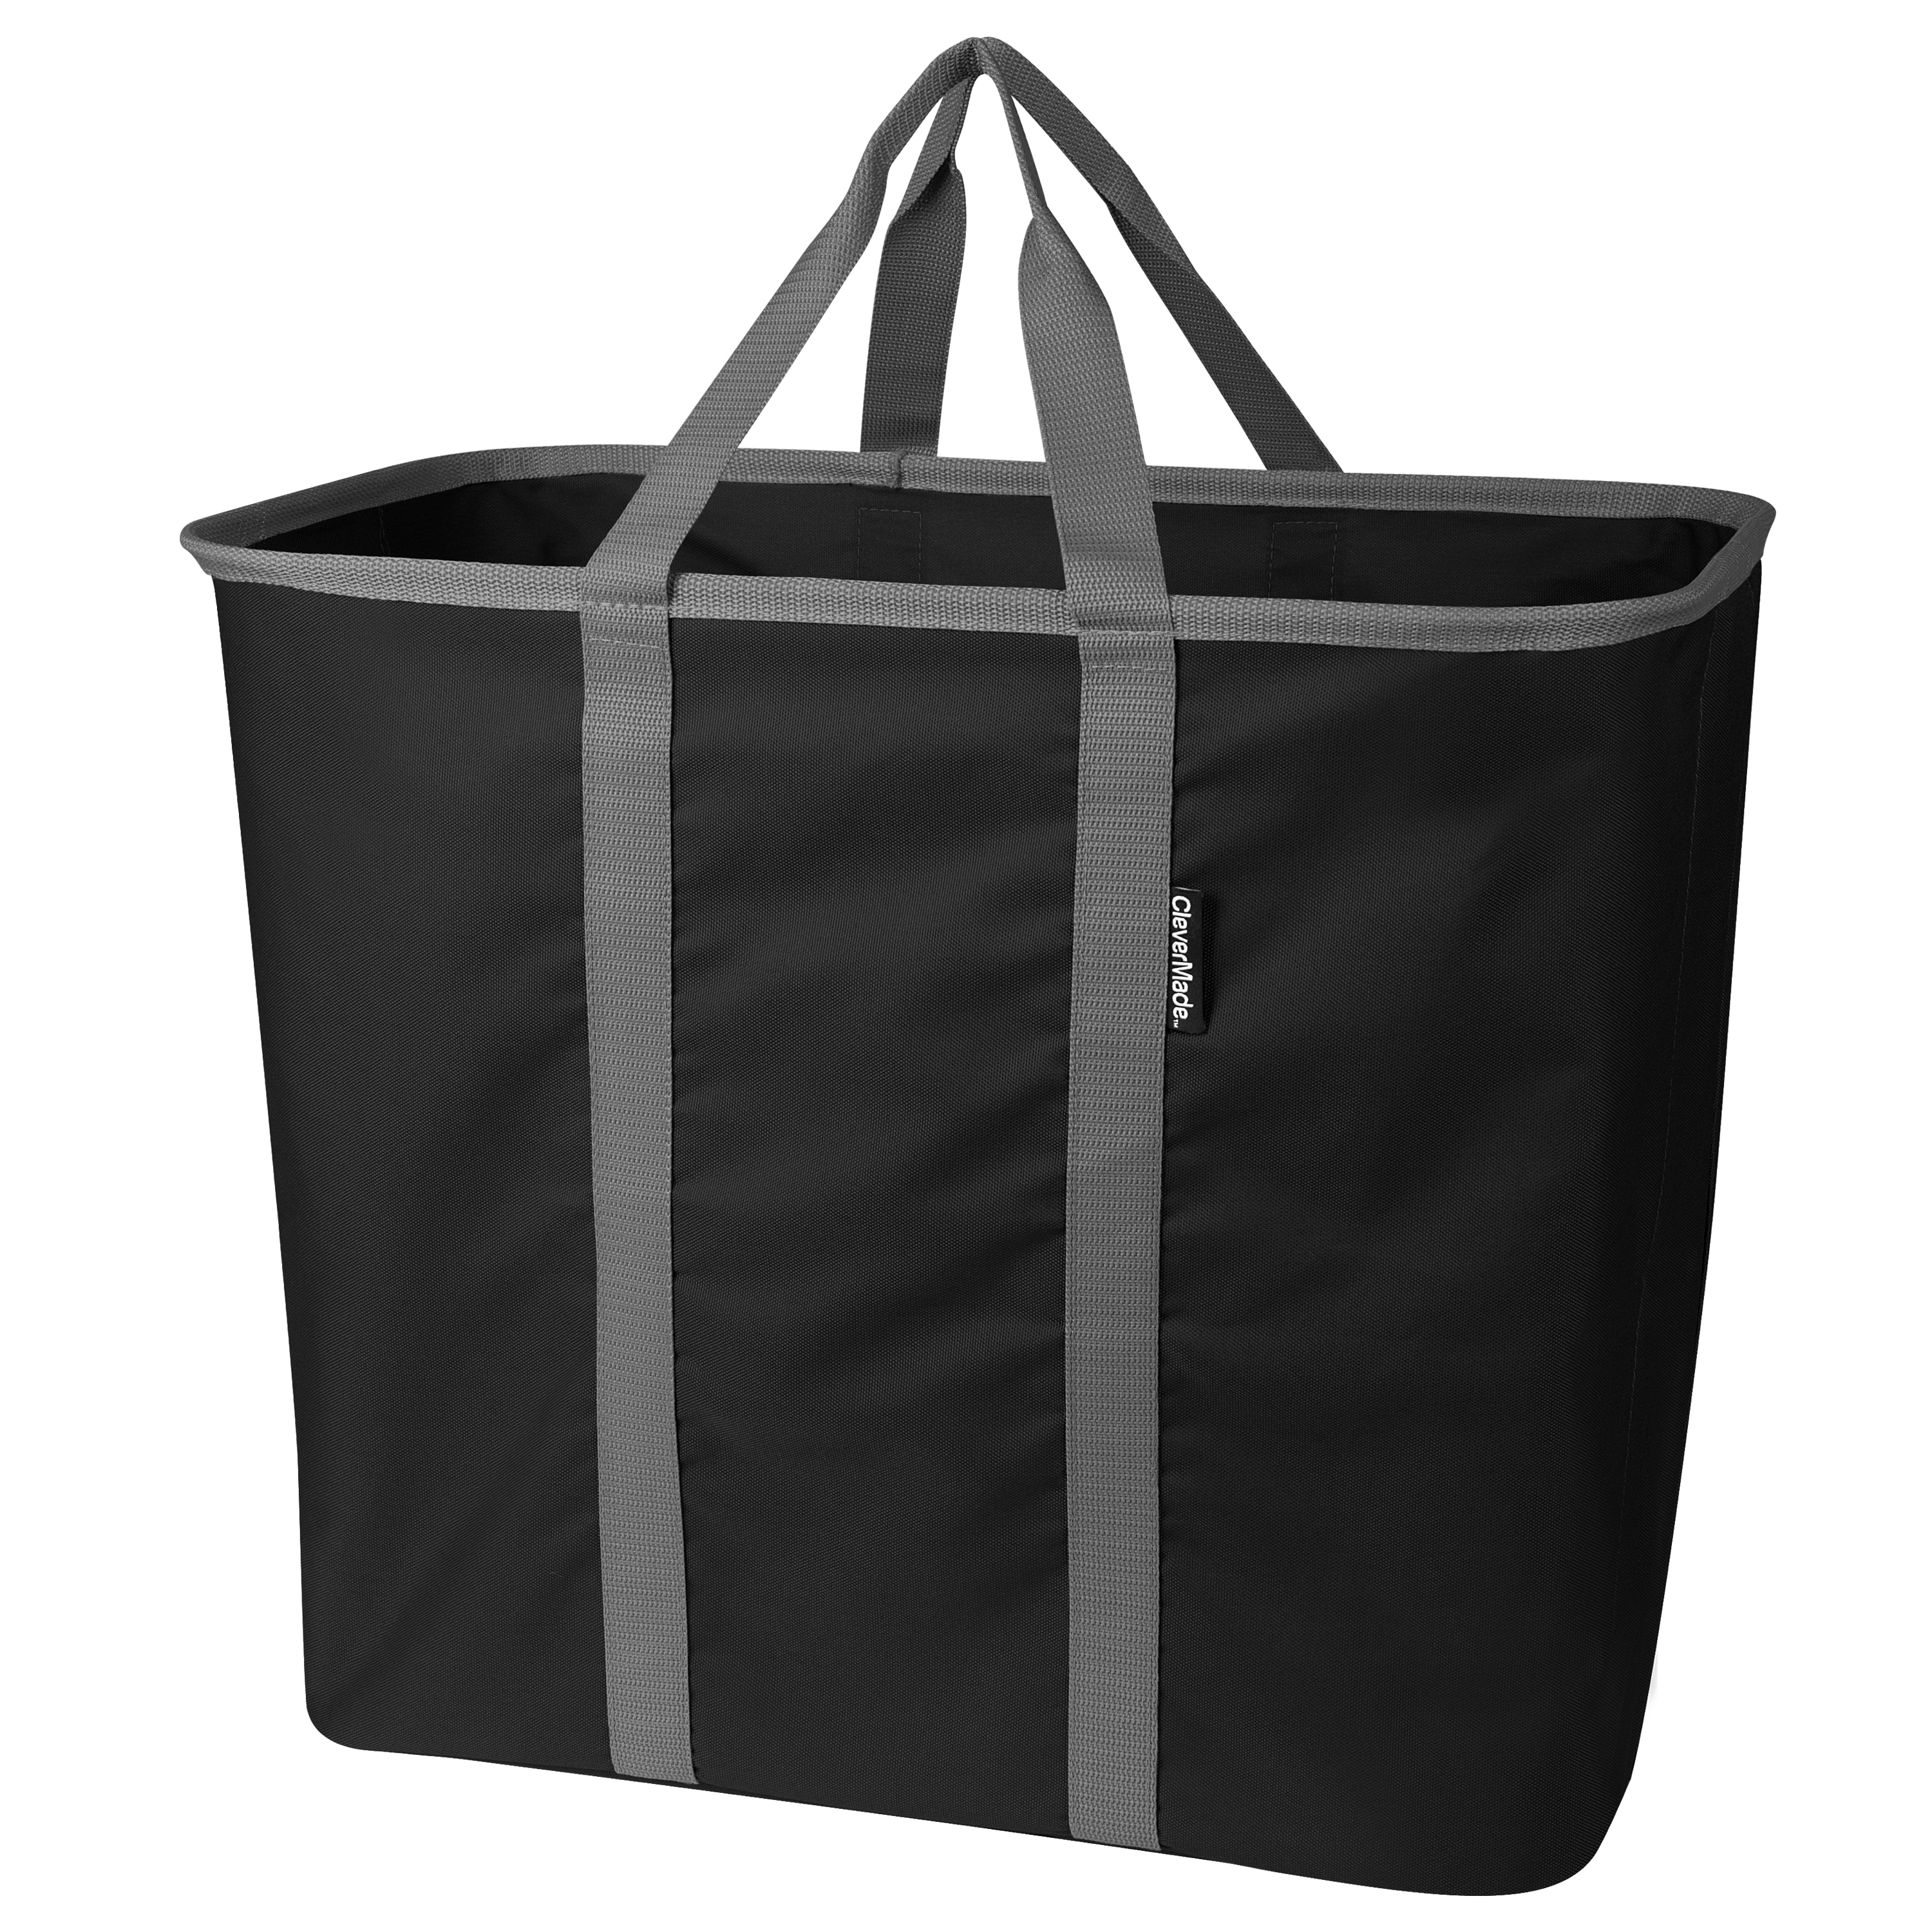 Collapsible Laundry Basket Hamper Clothes Storage Washing Line Foldable Bin Bags